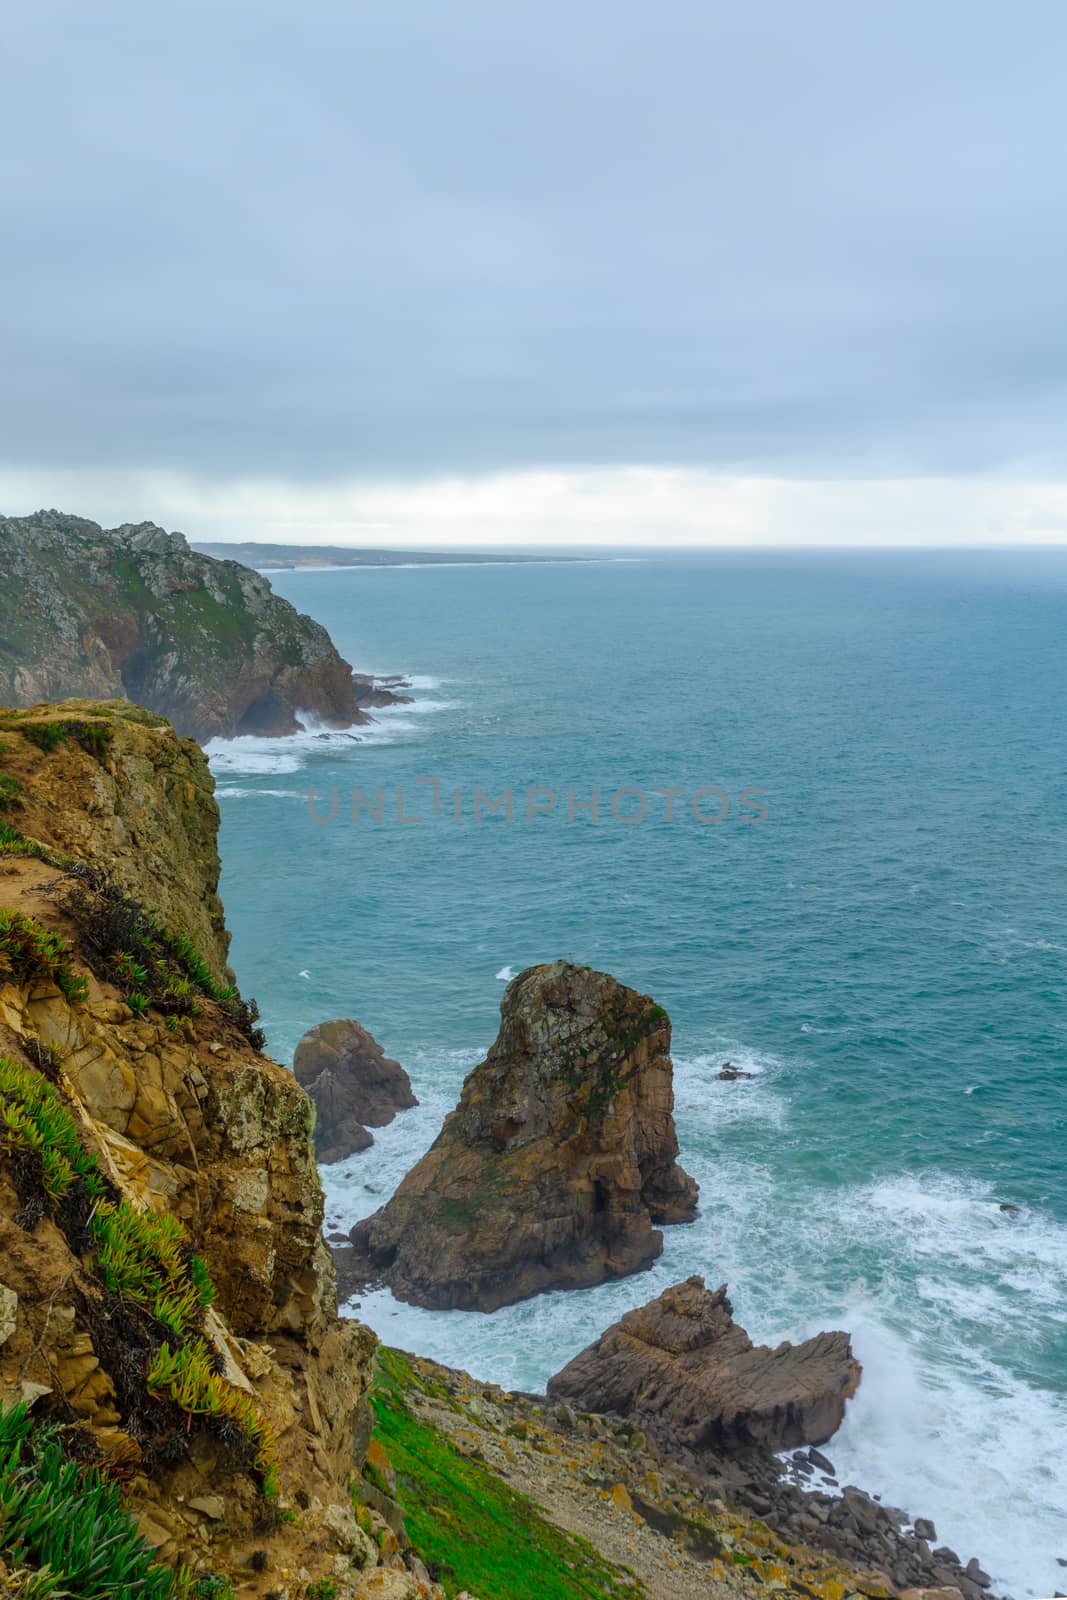 Coastal landscape in Cabo (Cape) da Roca, Portugal. It is the westernmost point in mainland Europe